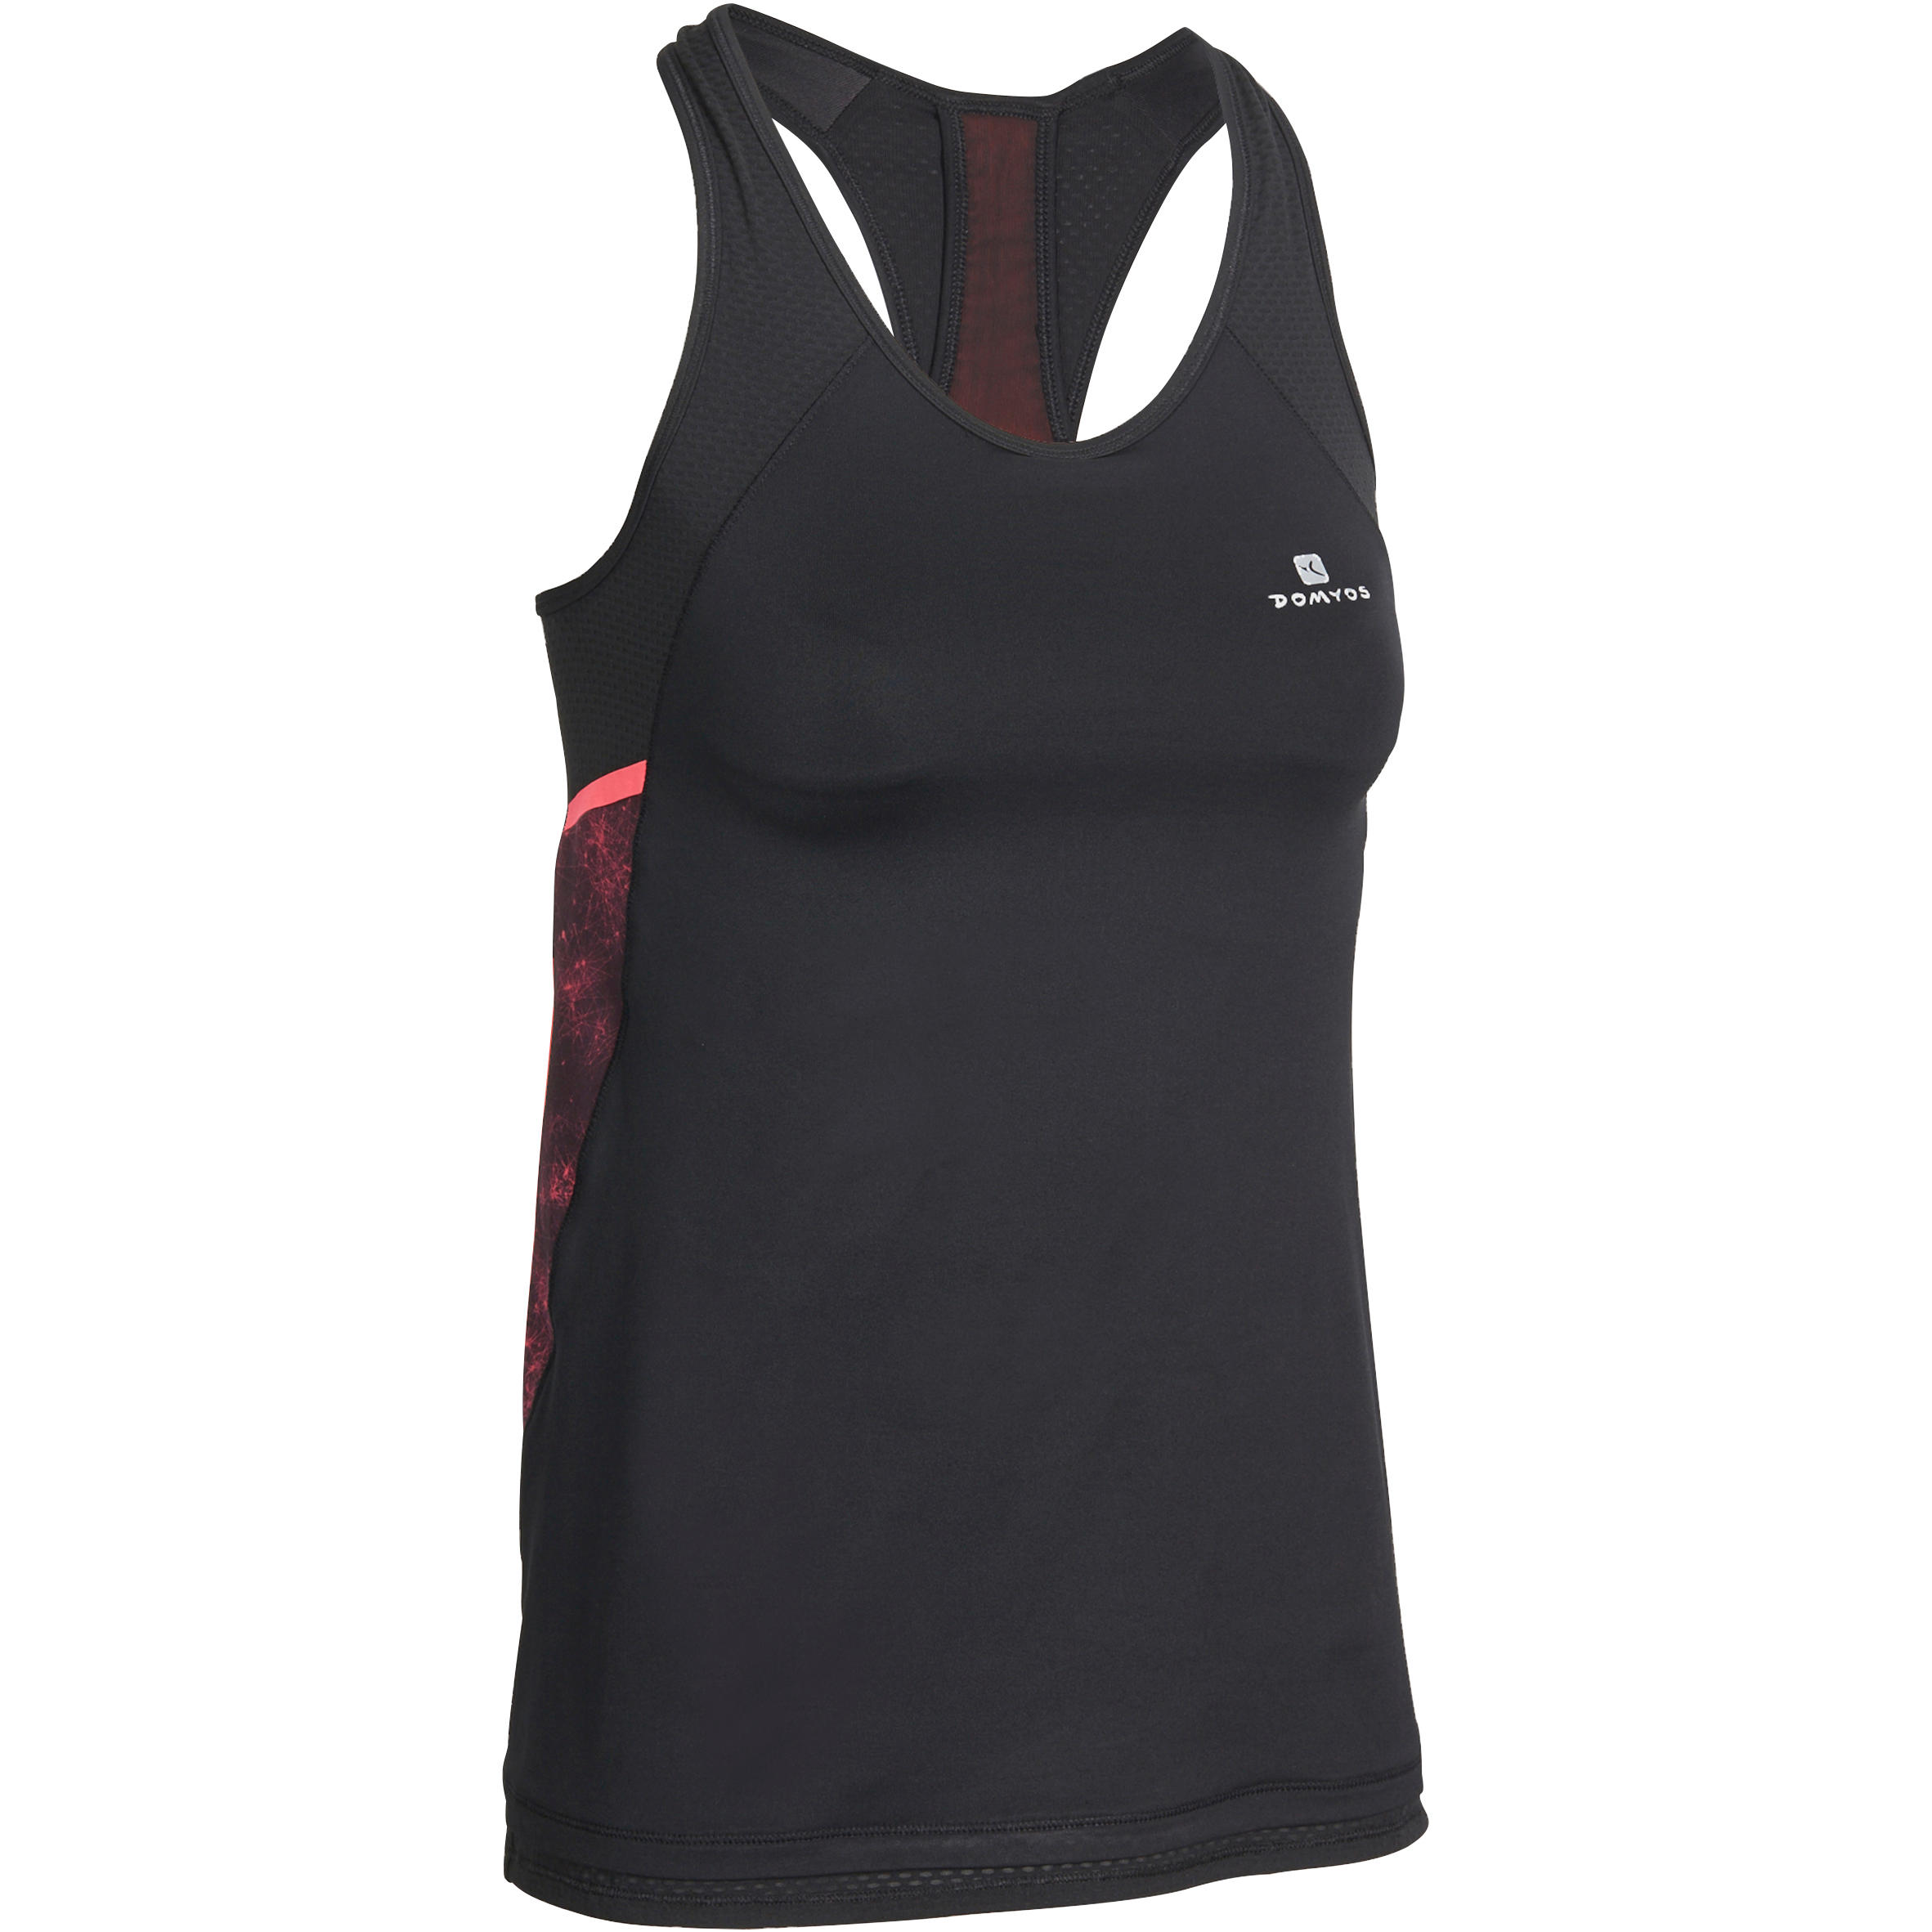 DOMYOS Energy Xtreme Women's Fitness Tank Top with Built-in Bra - Black